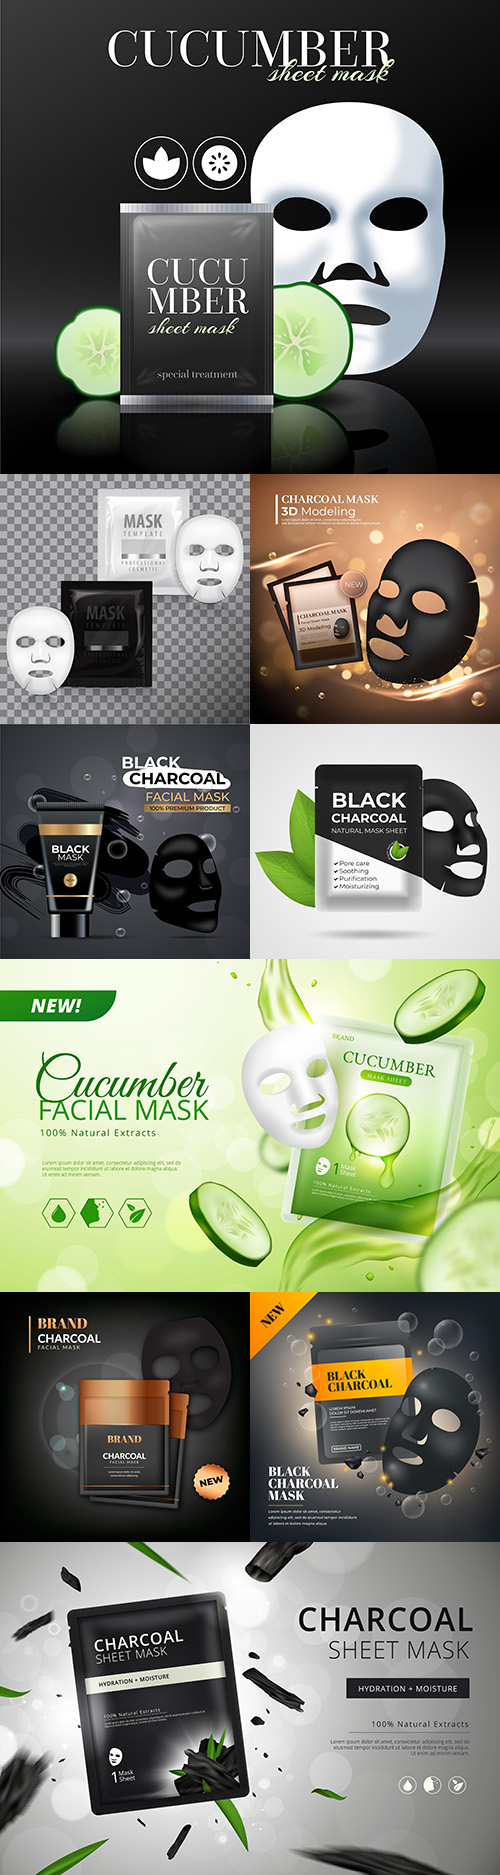 Realistic design template for cucumber and coal mask sheet
